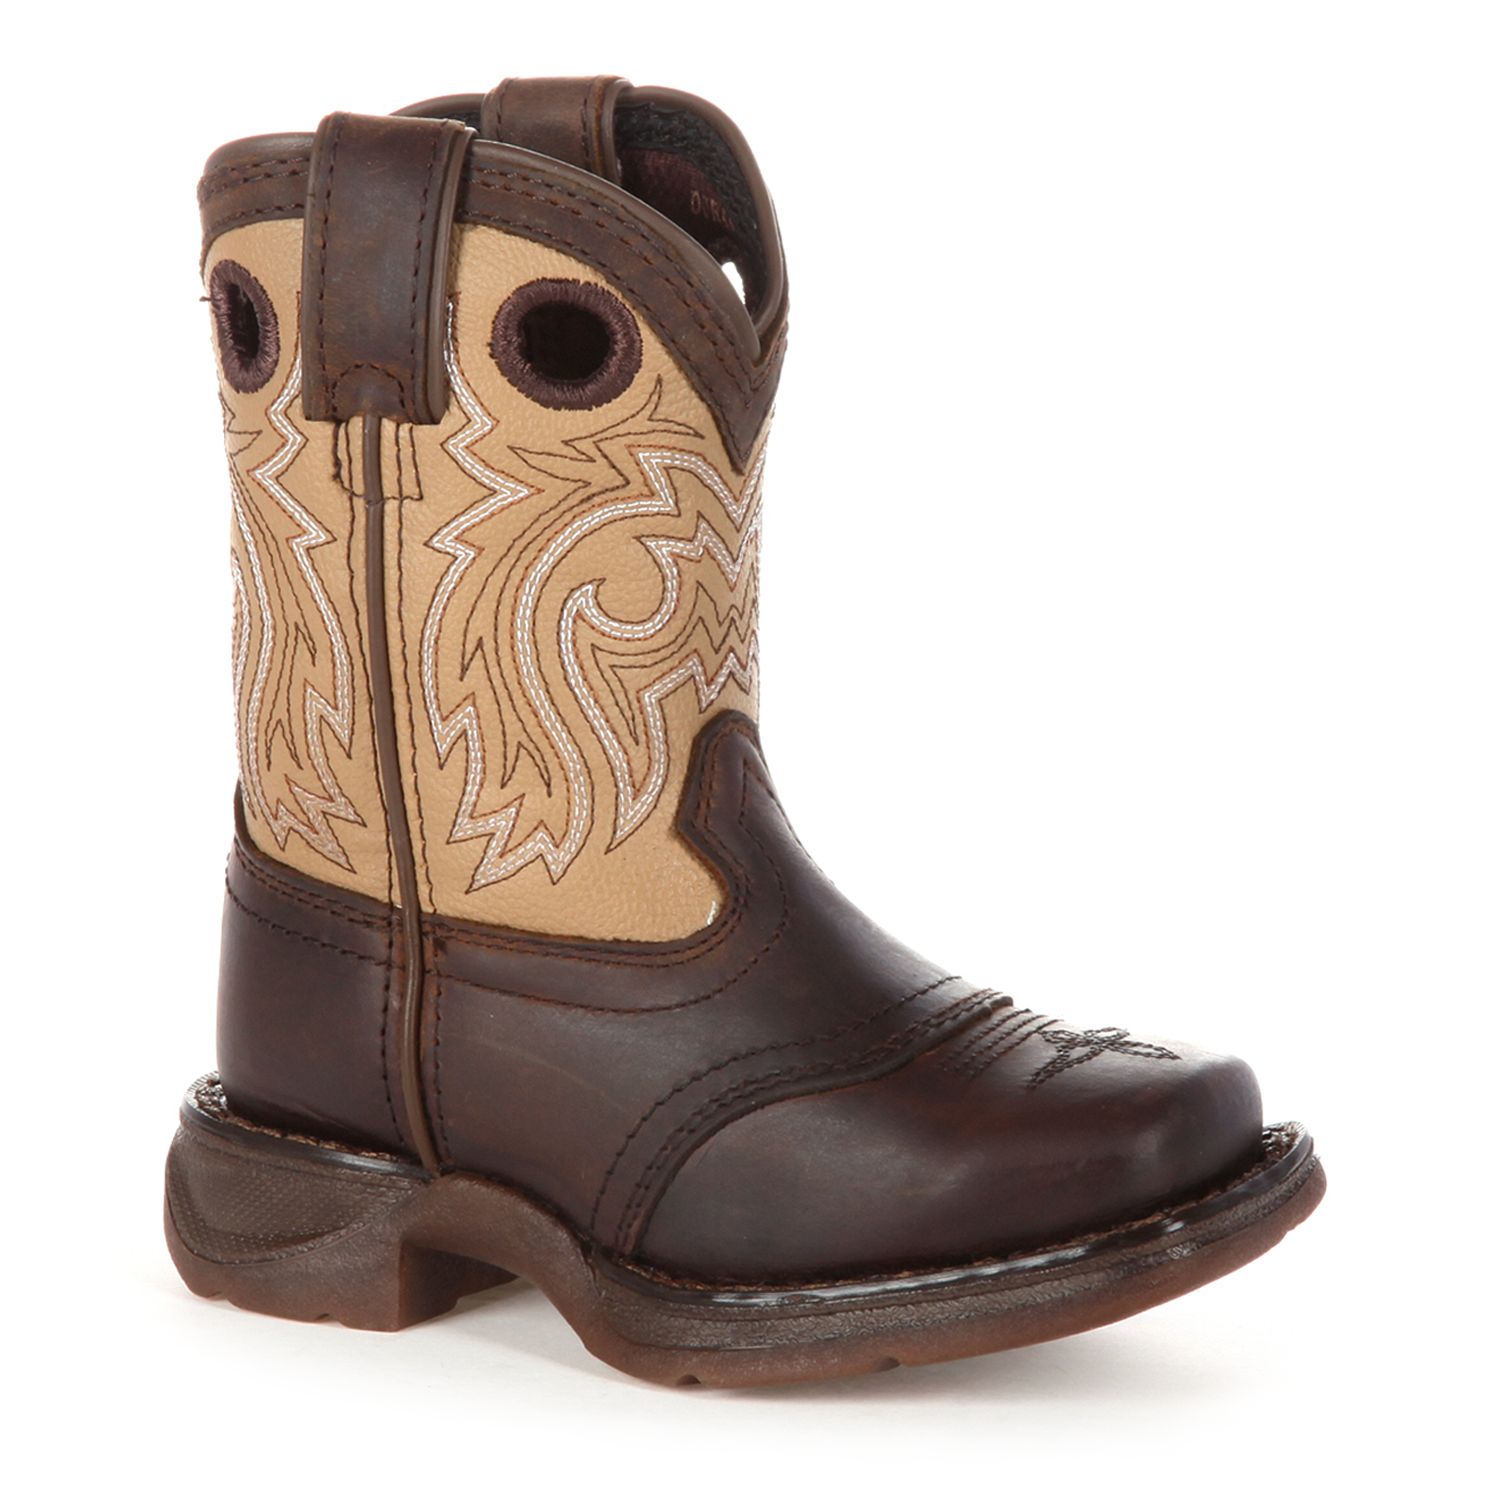 Image for Durango Lil Saddle Kids Western Boots at Kohl's.